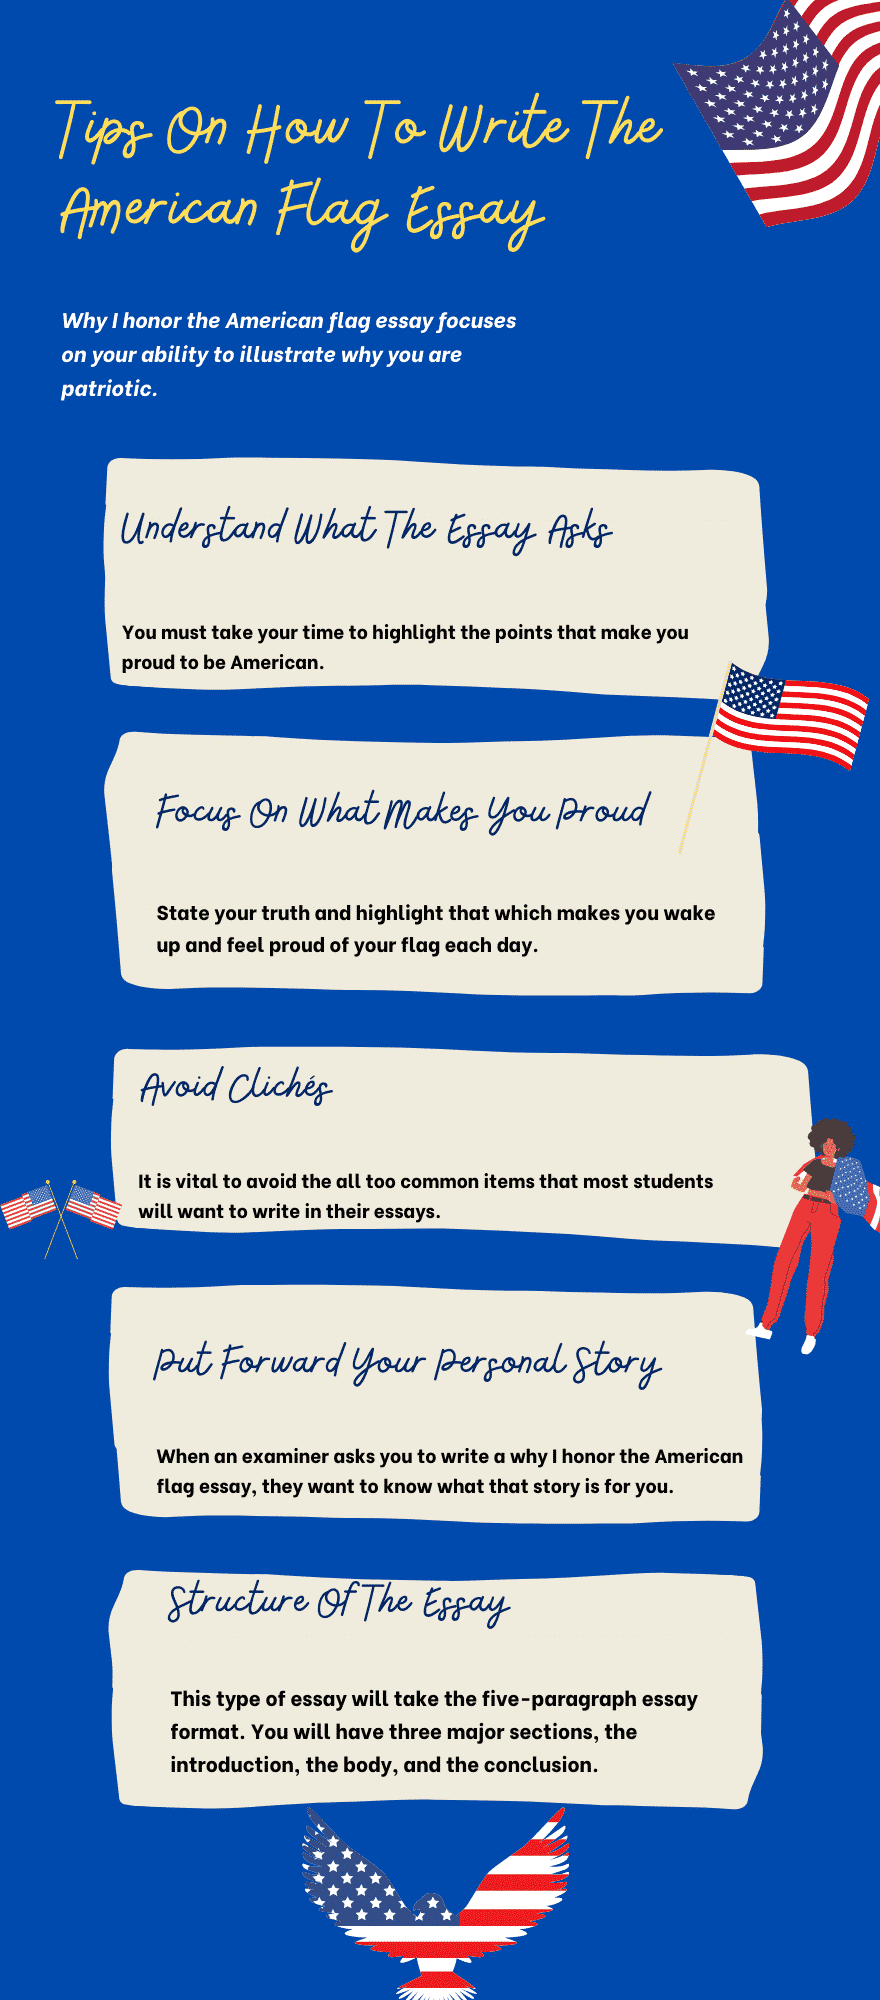 Tips On How To Write The American Flag Essay